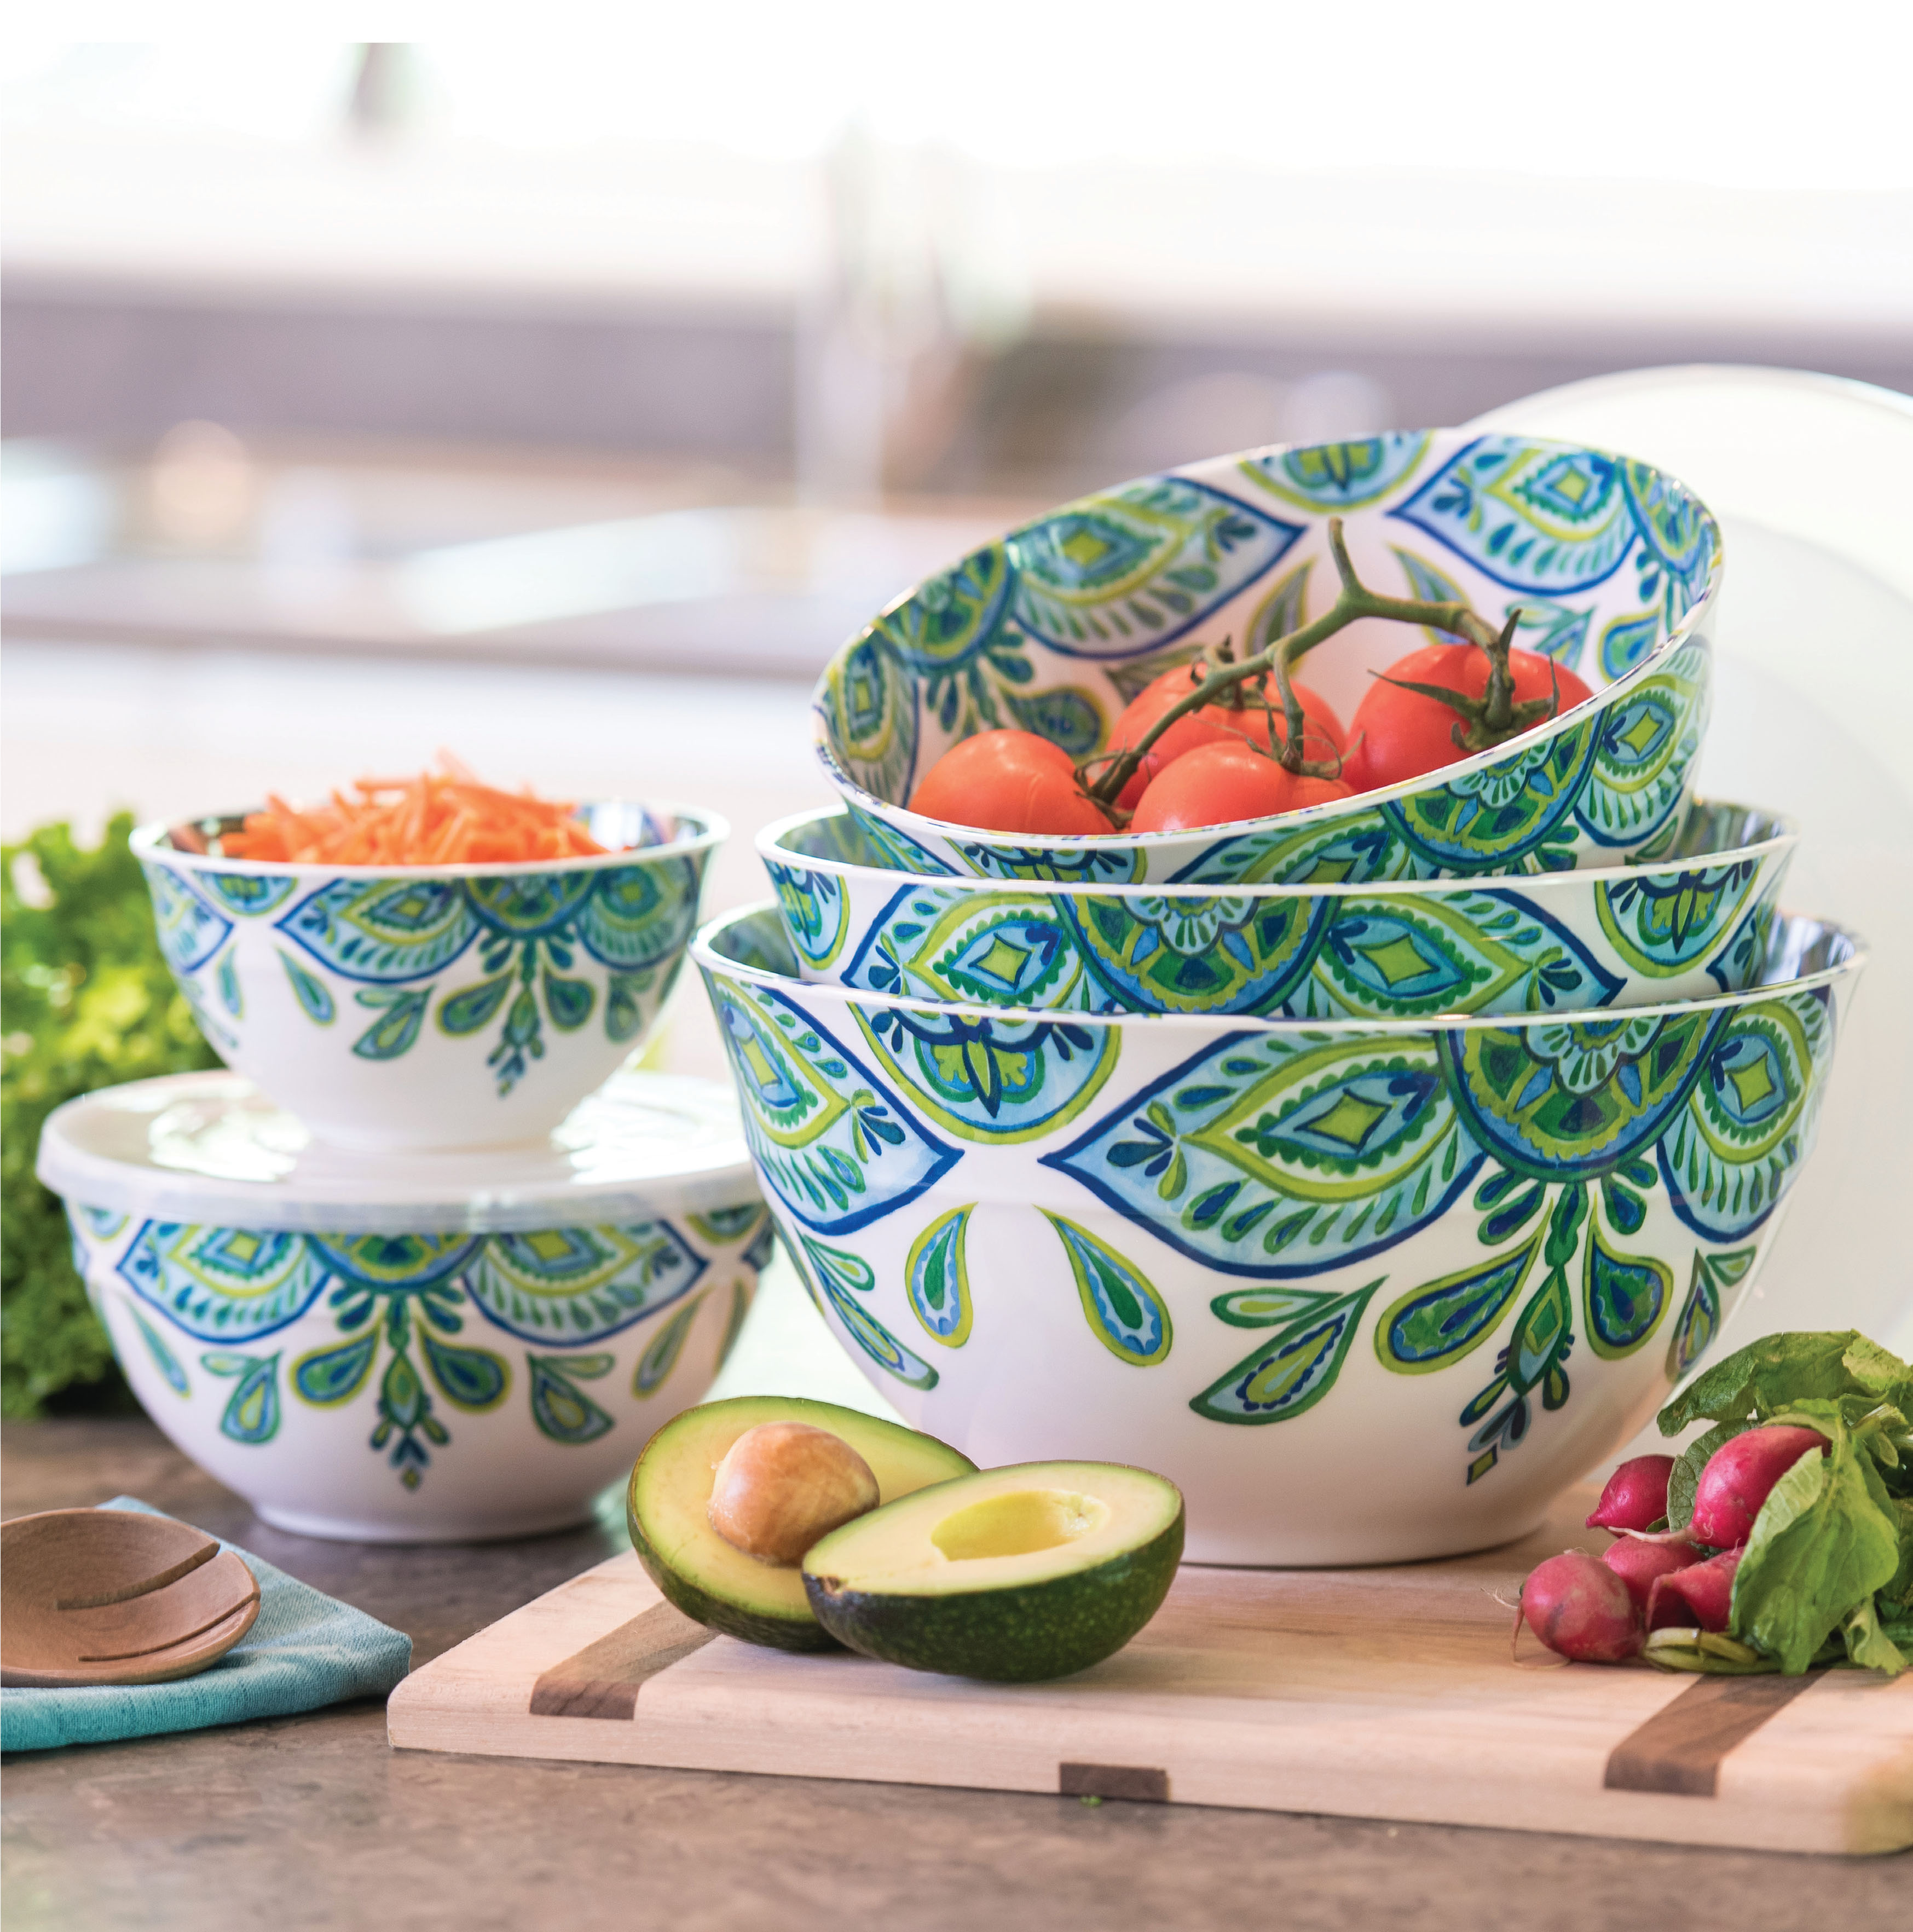 10 Piece Melamine Mixing Bowl Set with Lids, Green and Blue Floral - image 3 of 8